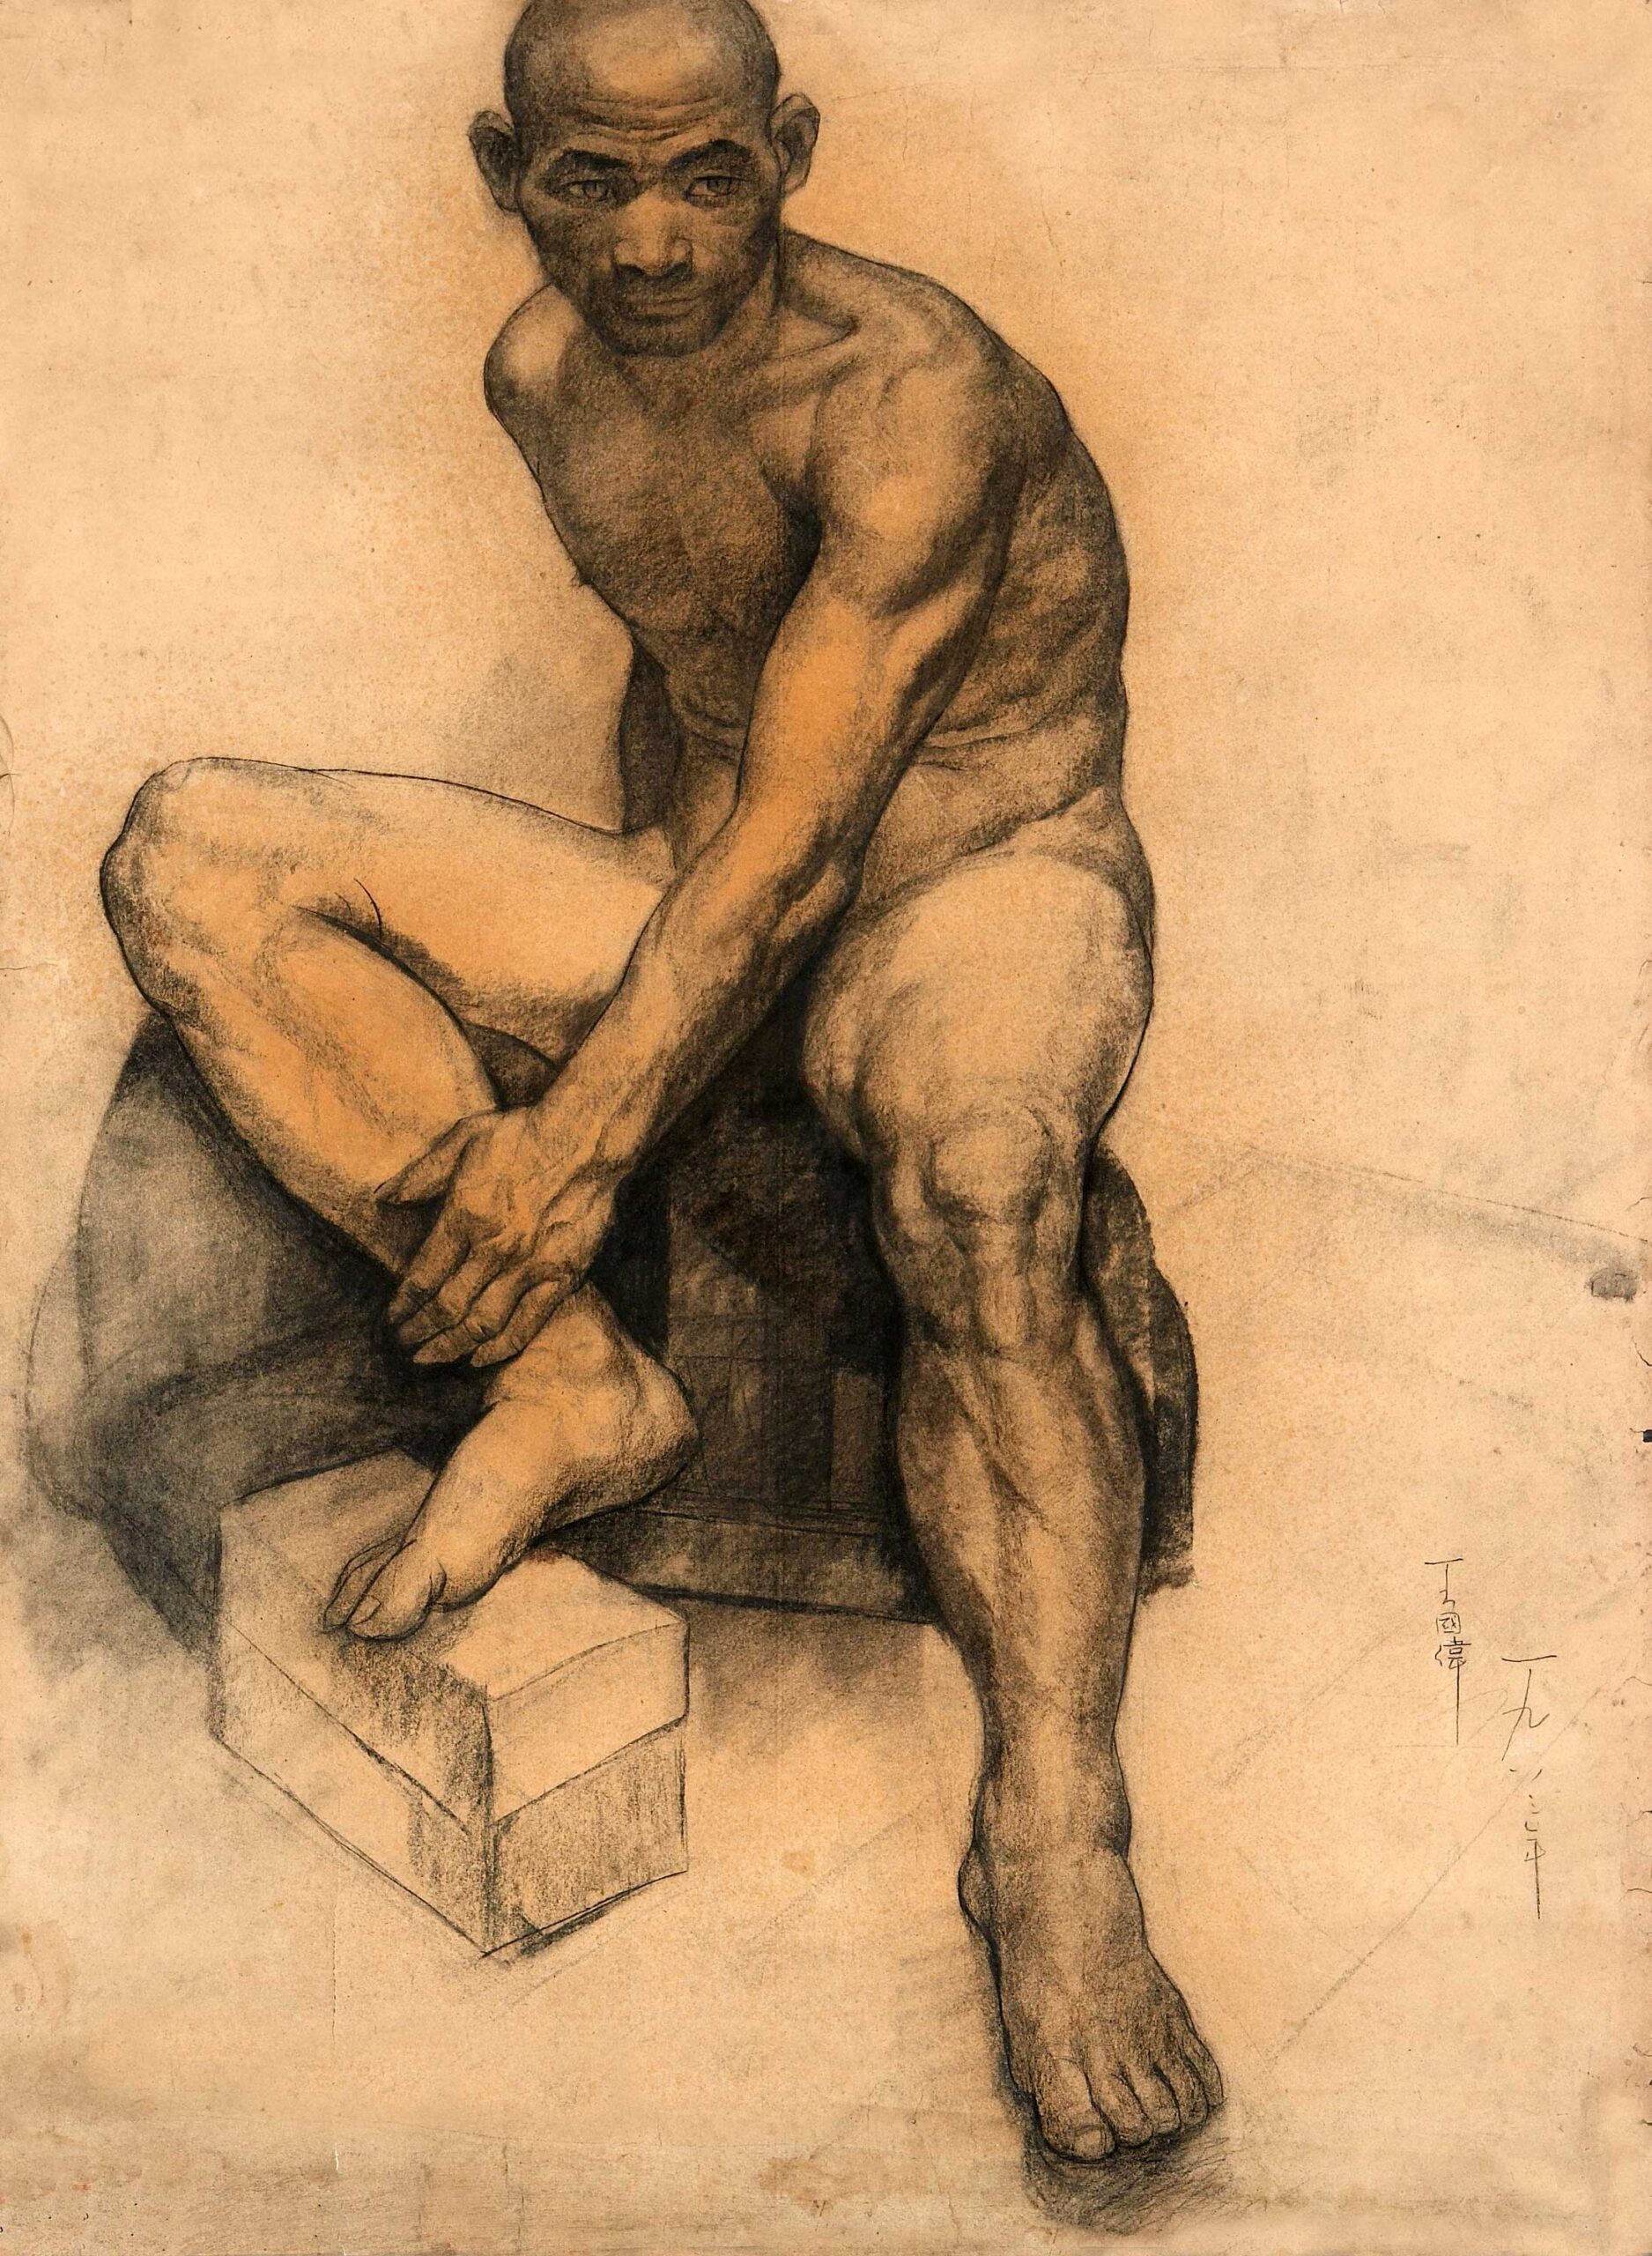 Chinese figure academic drawing